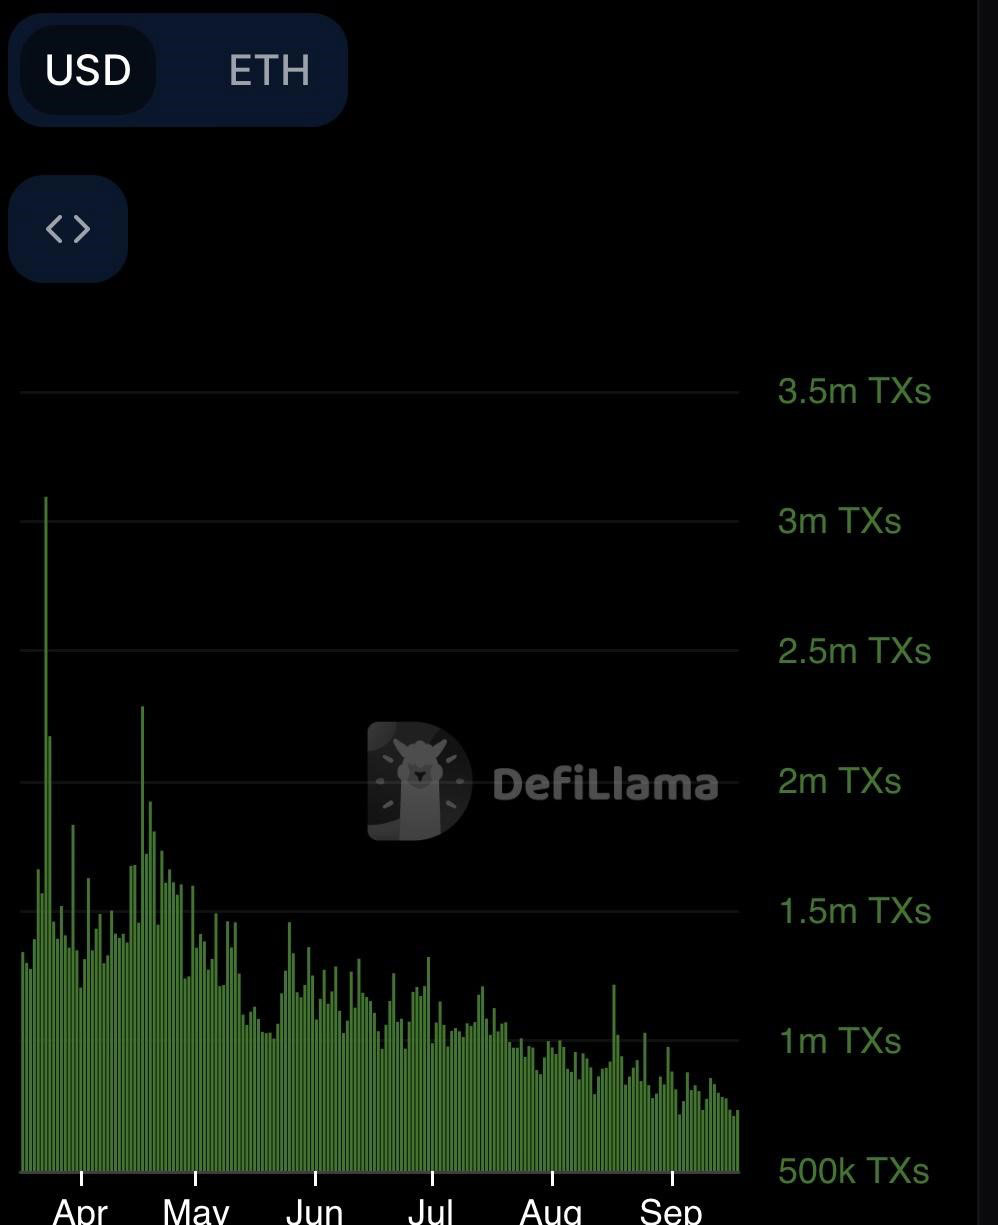 Coinbase-backed Base has taken over the top Layer 2 ether chain after achieving nearly 2 million daily transactions https://defillama.com/chain/arbitrum?txs=true&tvl=false